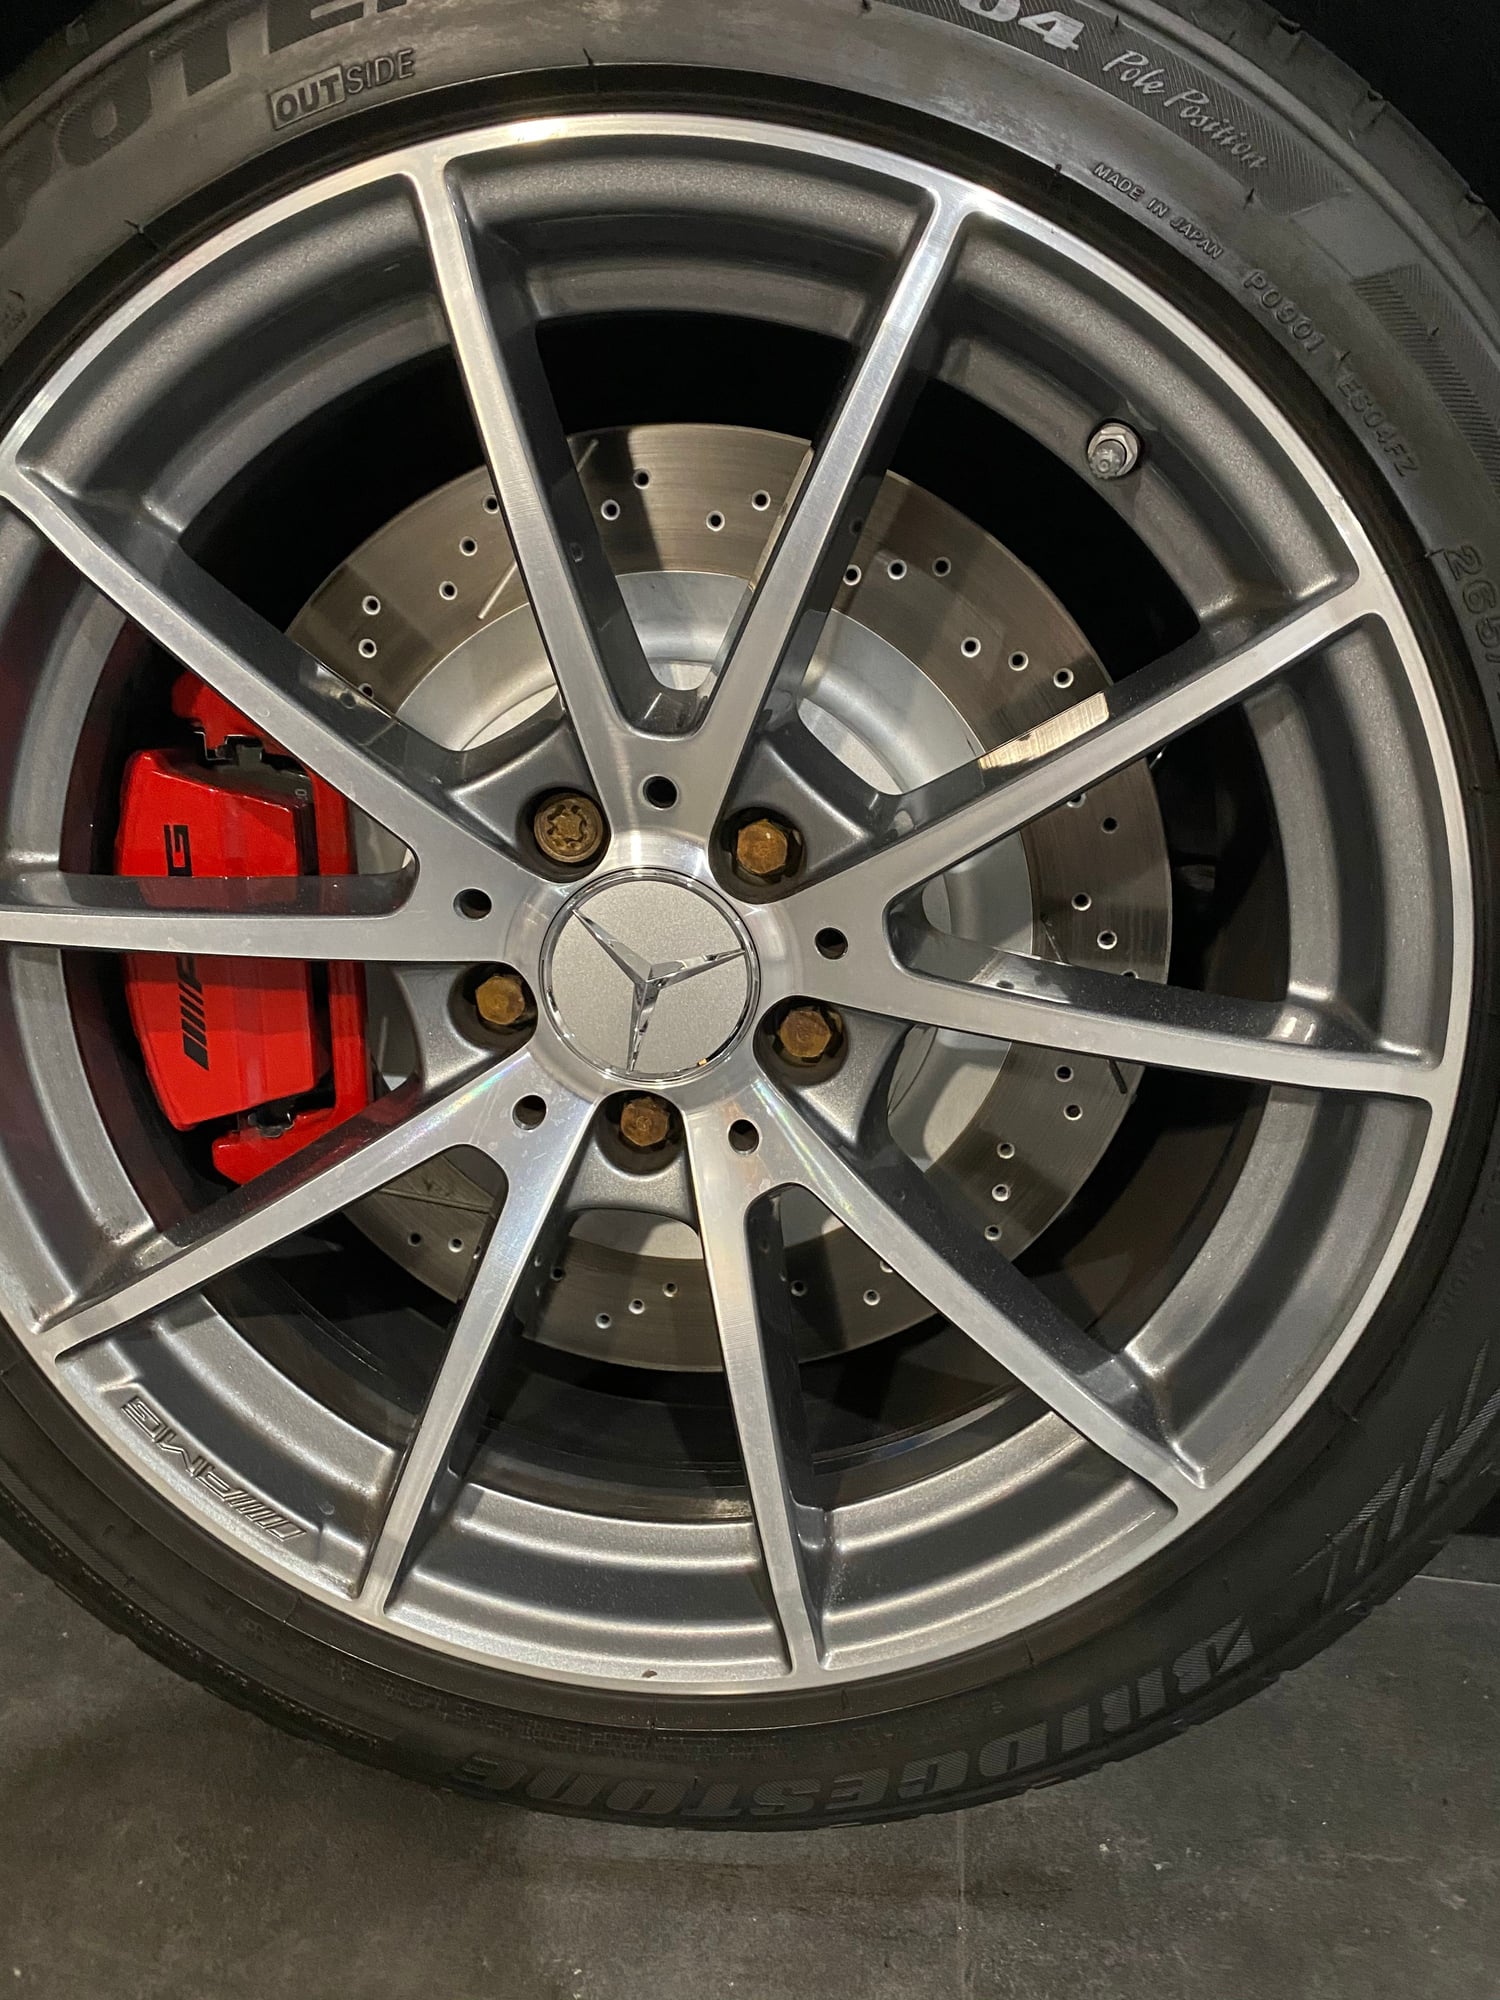 Wheels and Tires/Axles - Mercedes C63 AMG Forged Wheels + Tires OEM - Used - 2008 to 2020 Mercedes-Benz C63 AMG - Fountain Valley, CA 92708, United States